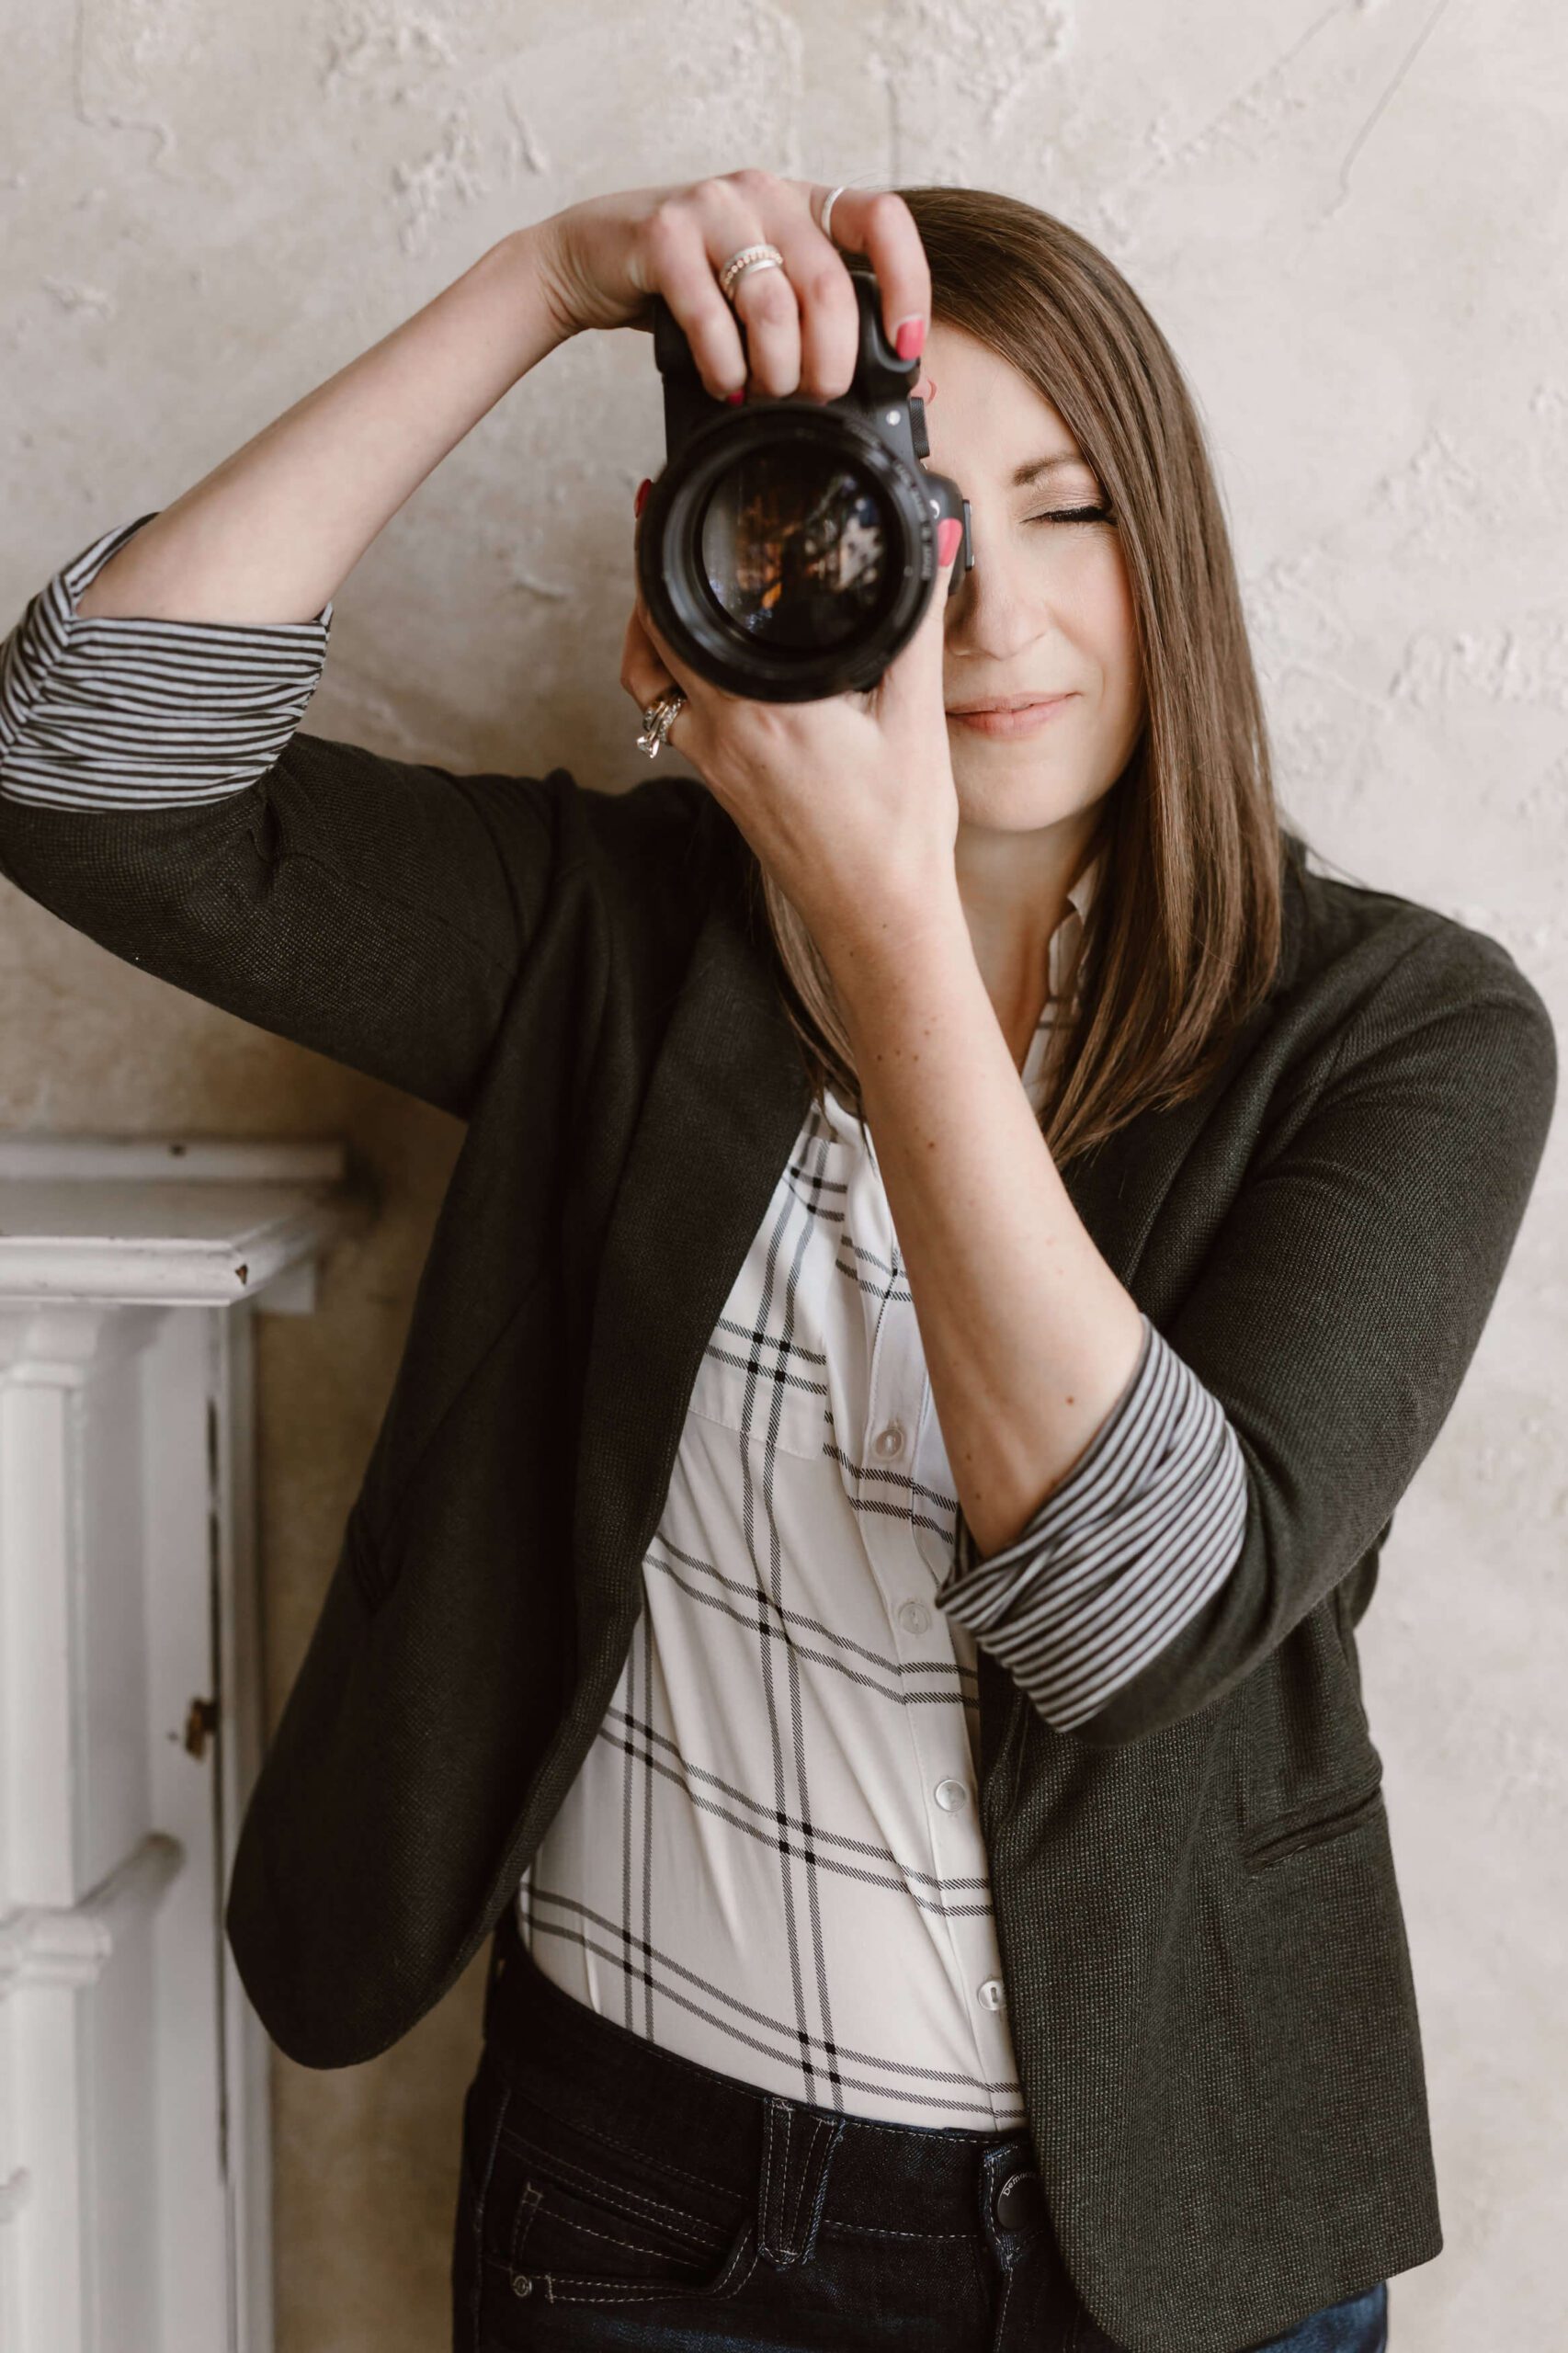 About Erin Morrison Photography holding camera and taking photo